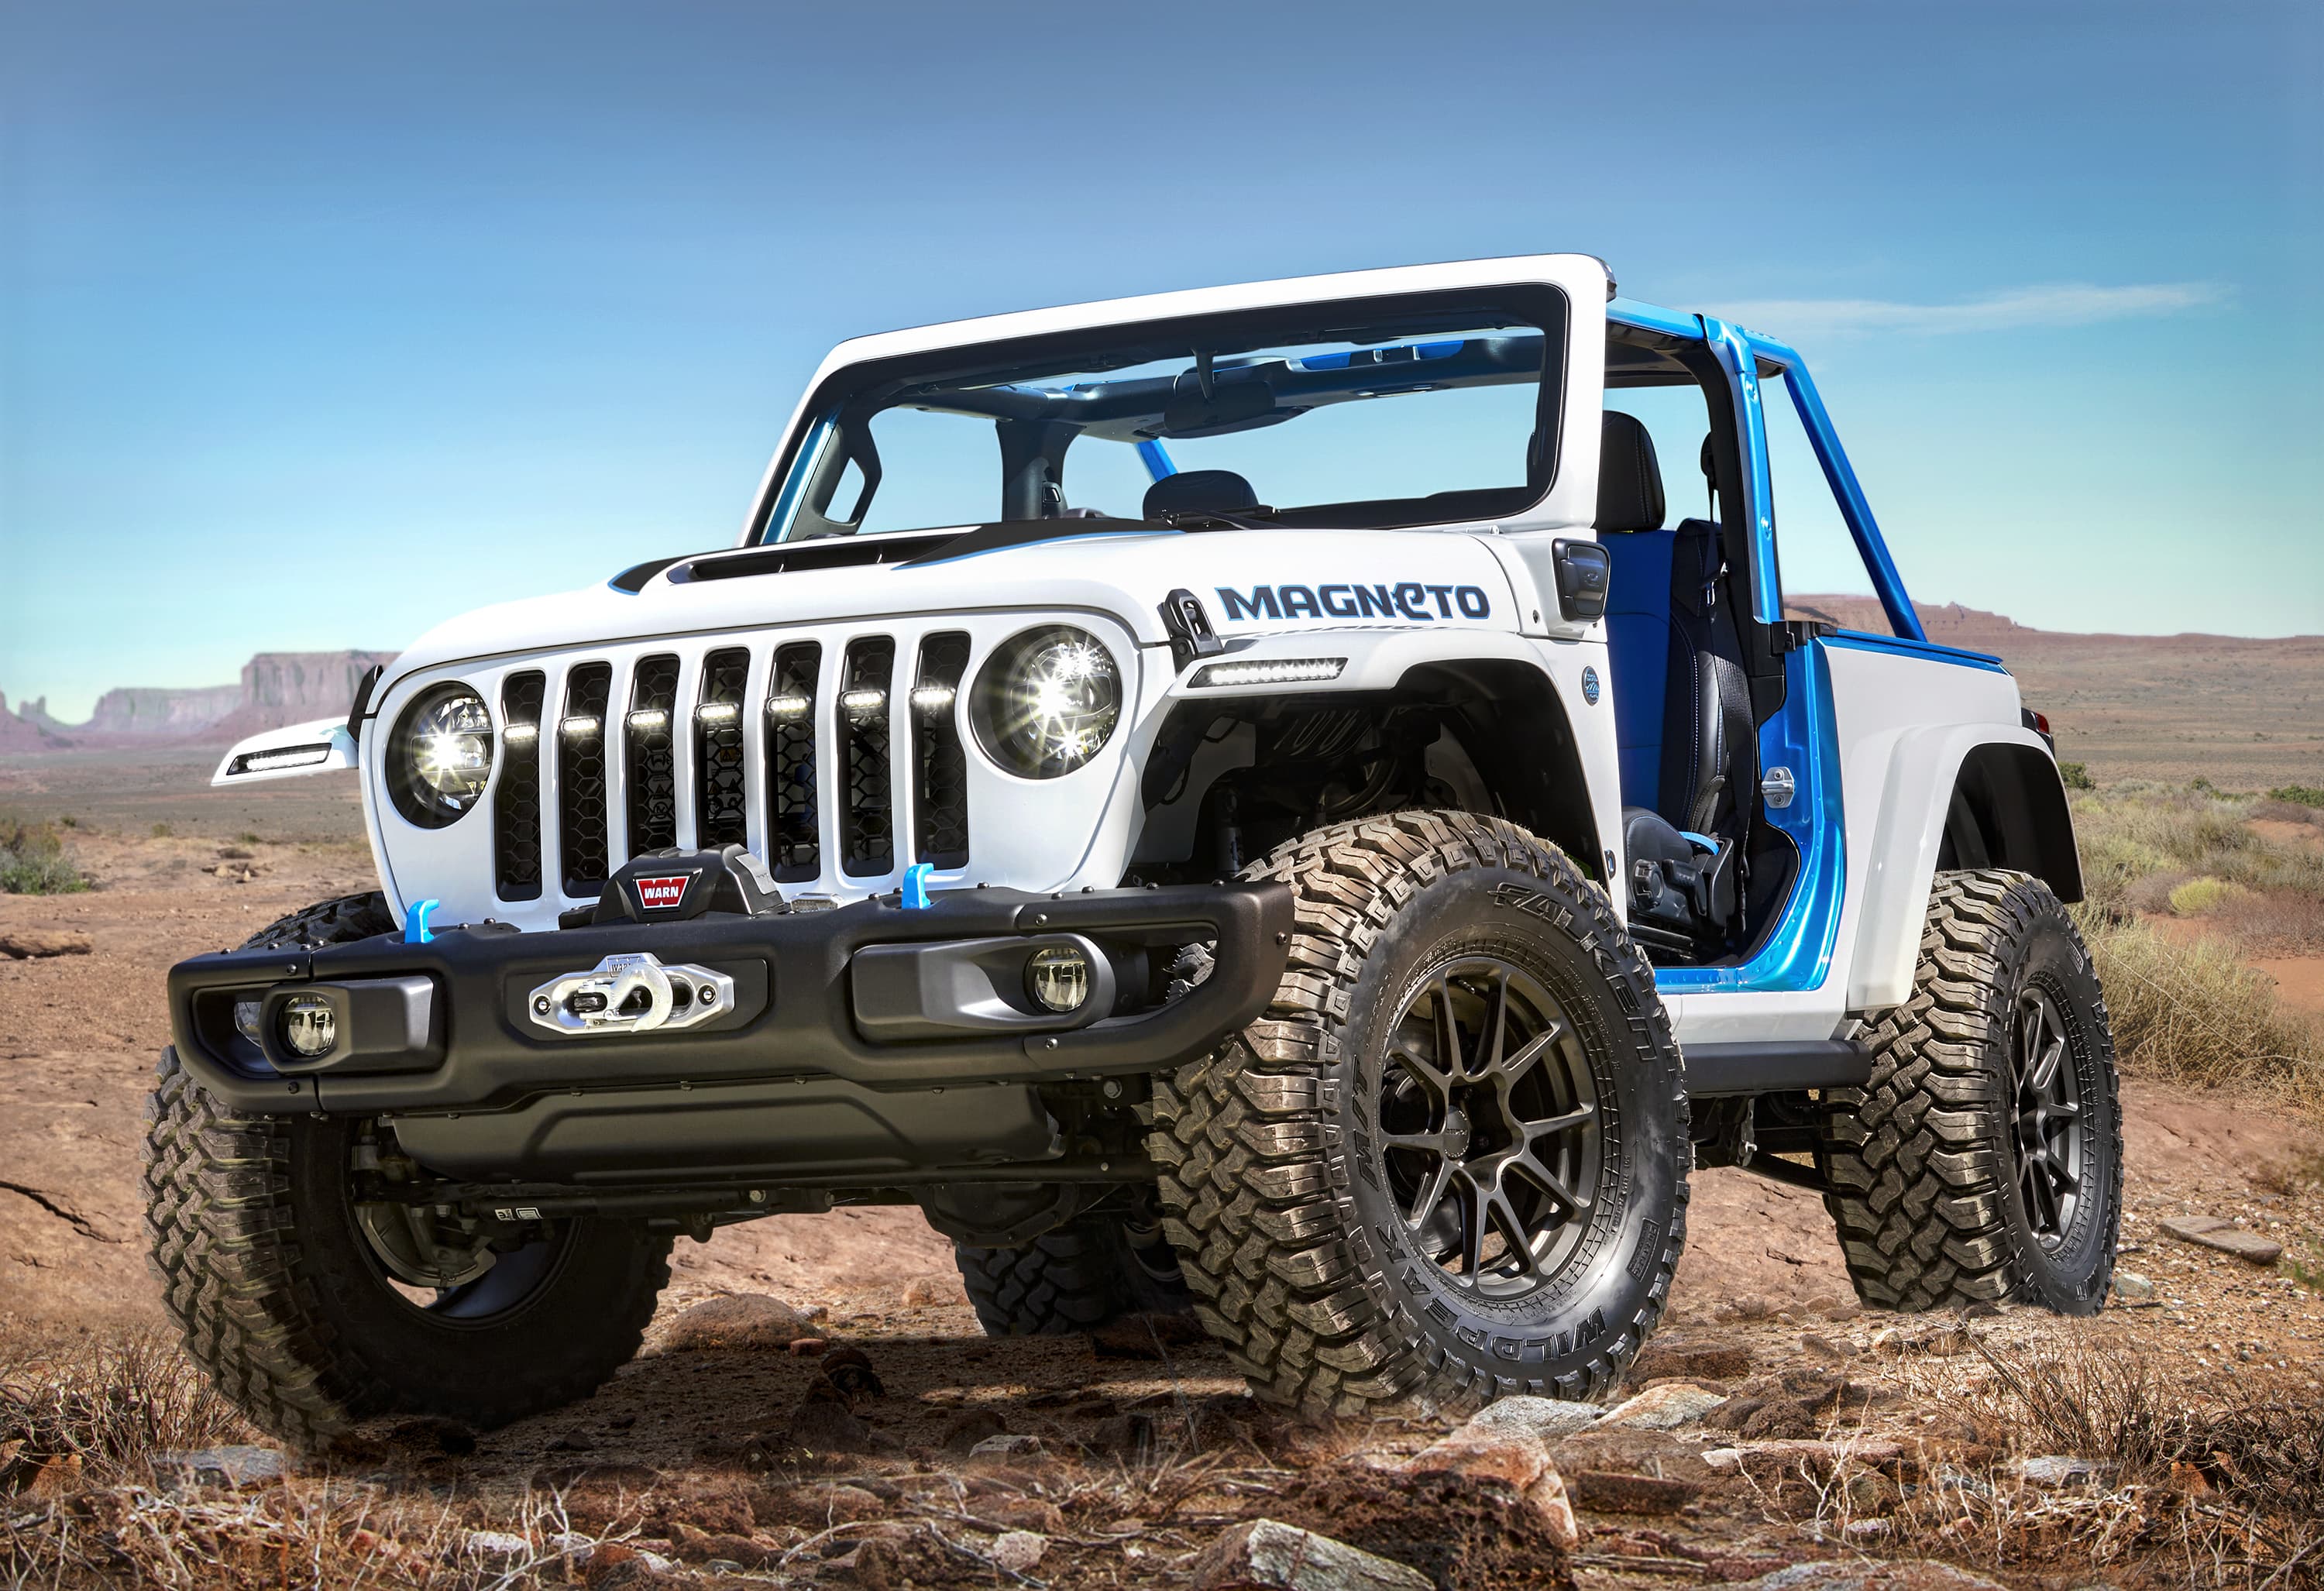 Jeep unveils all-electric Wrangler concept SUV